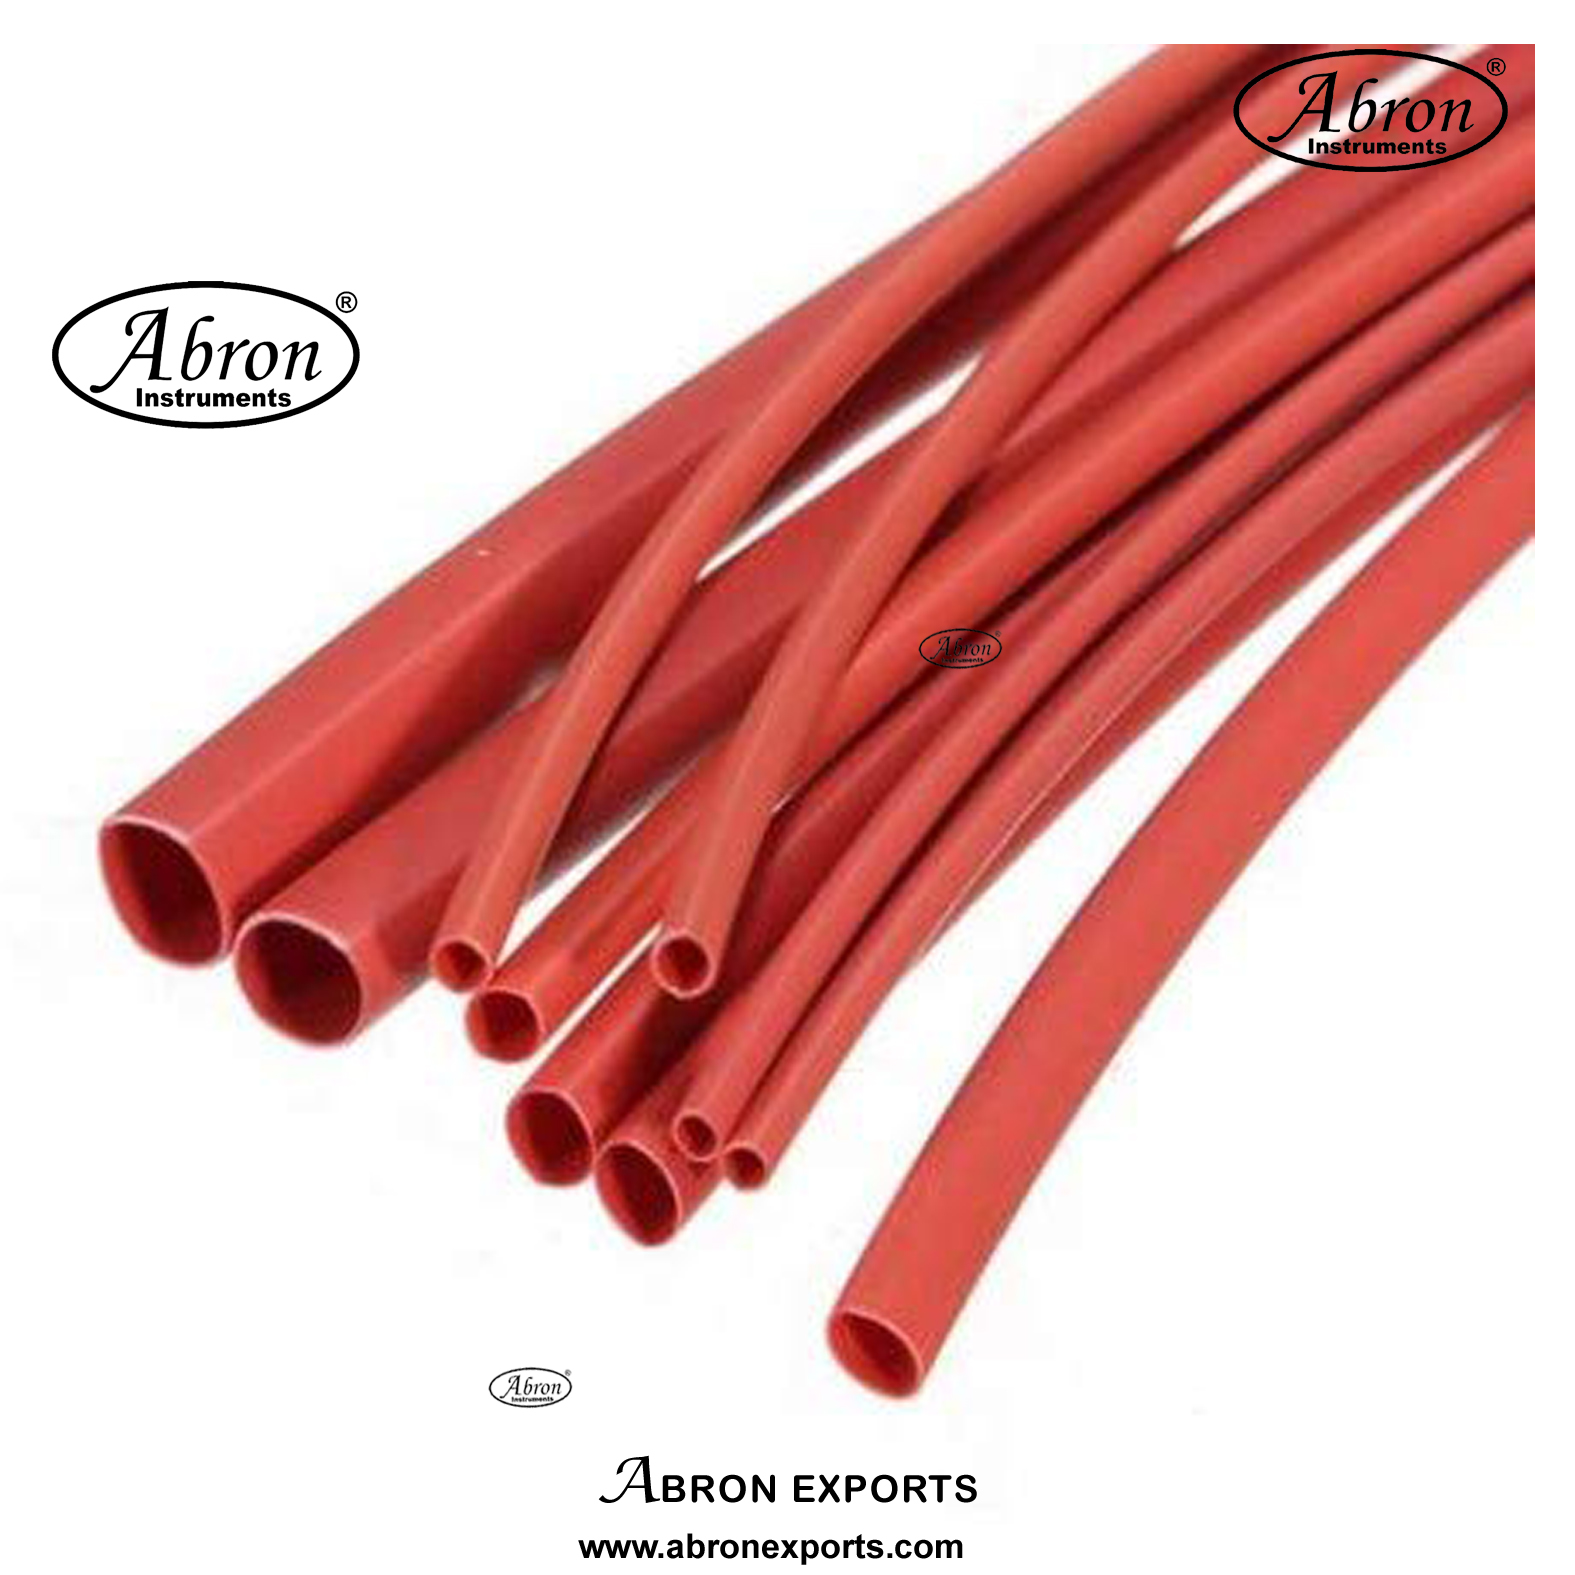 Wire shrik sleeve wraping wire joint 2-3-5mmxtotal 6meter Polyolefin Heat Shrink Tubinh Red Abron AE-1224WS